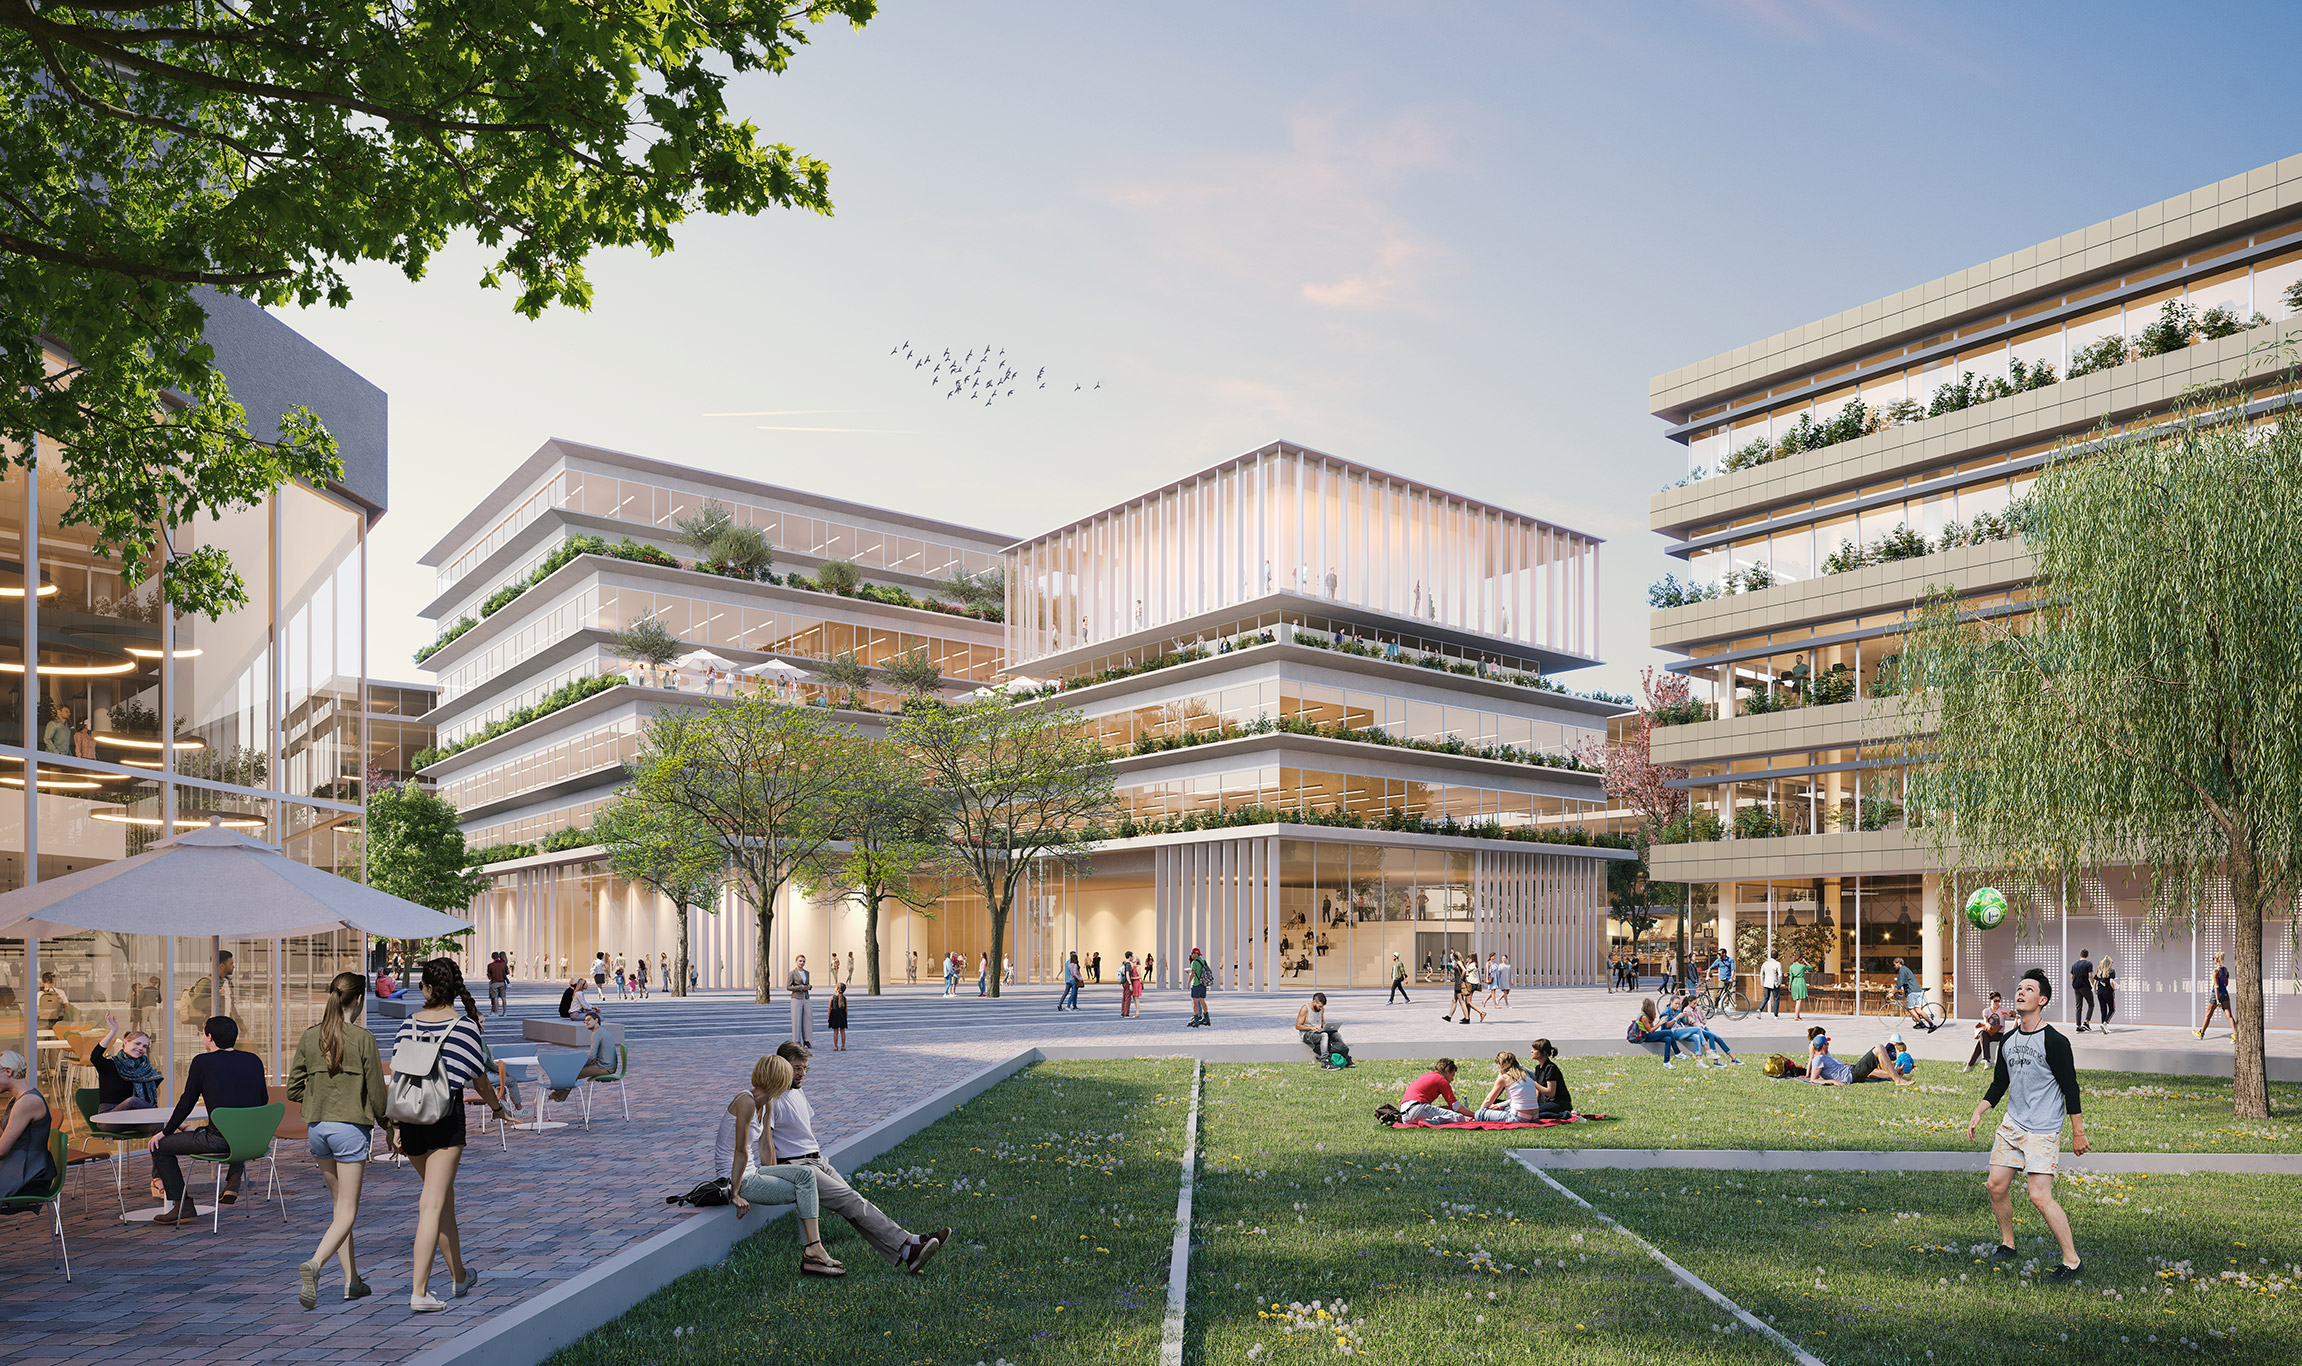 Visualization of the campus in Heilbronn